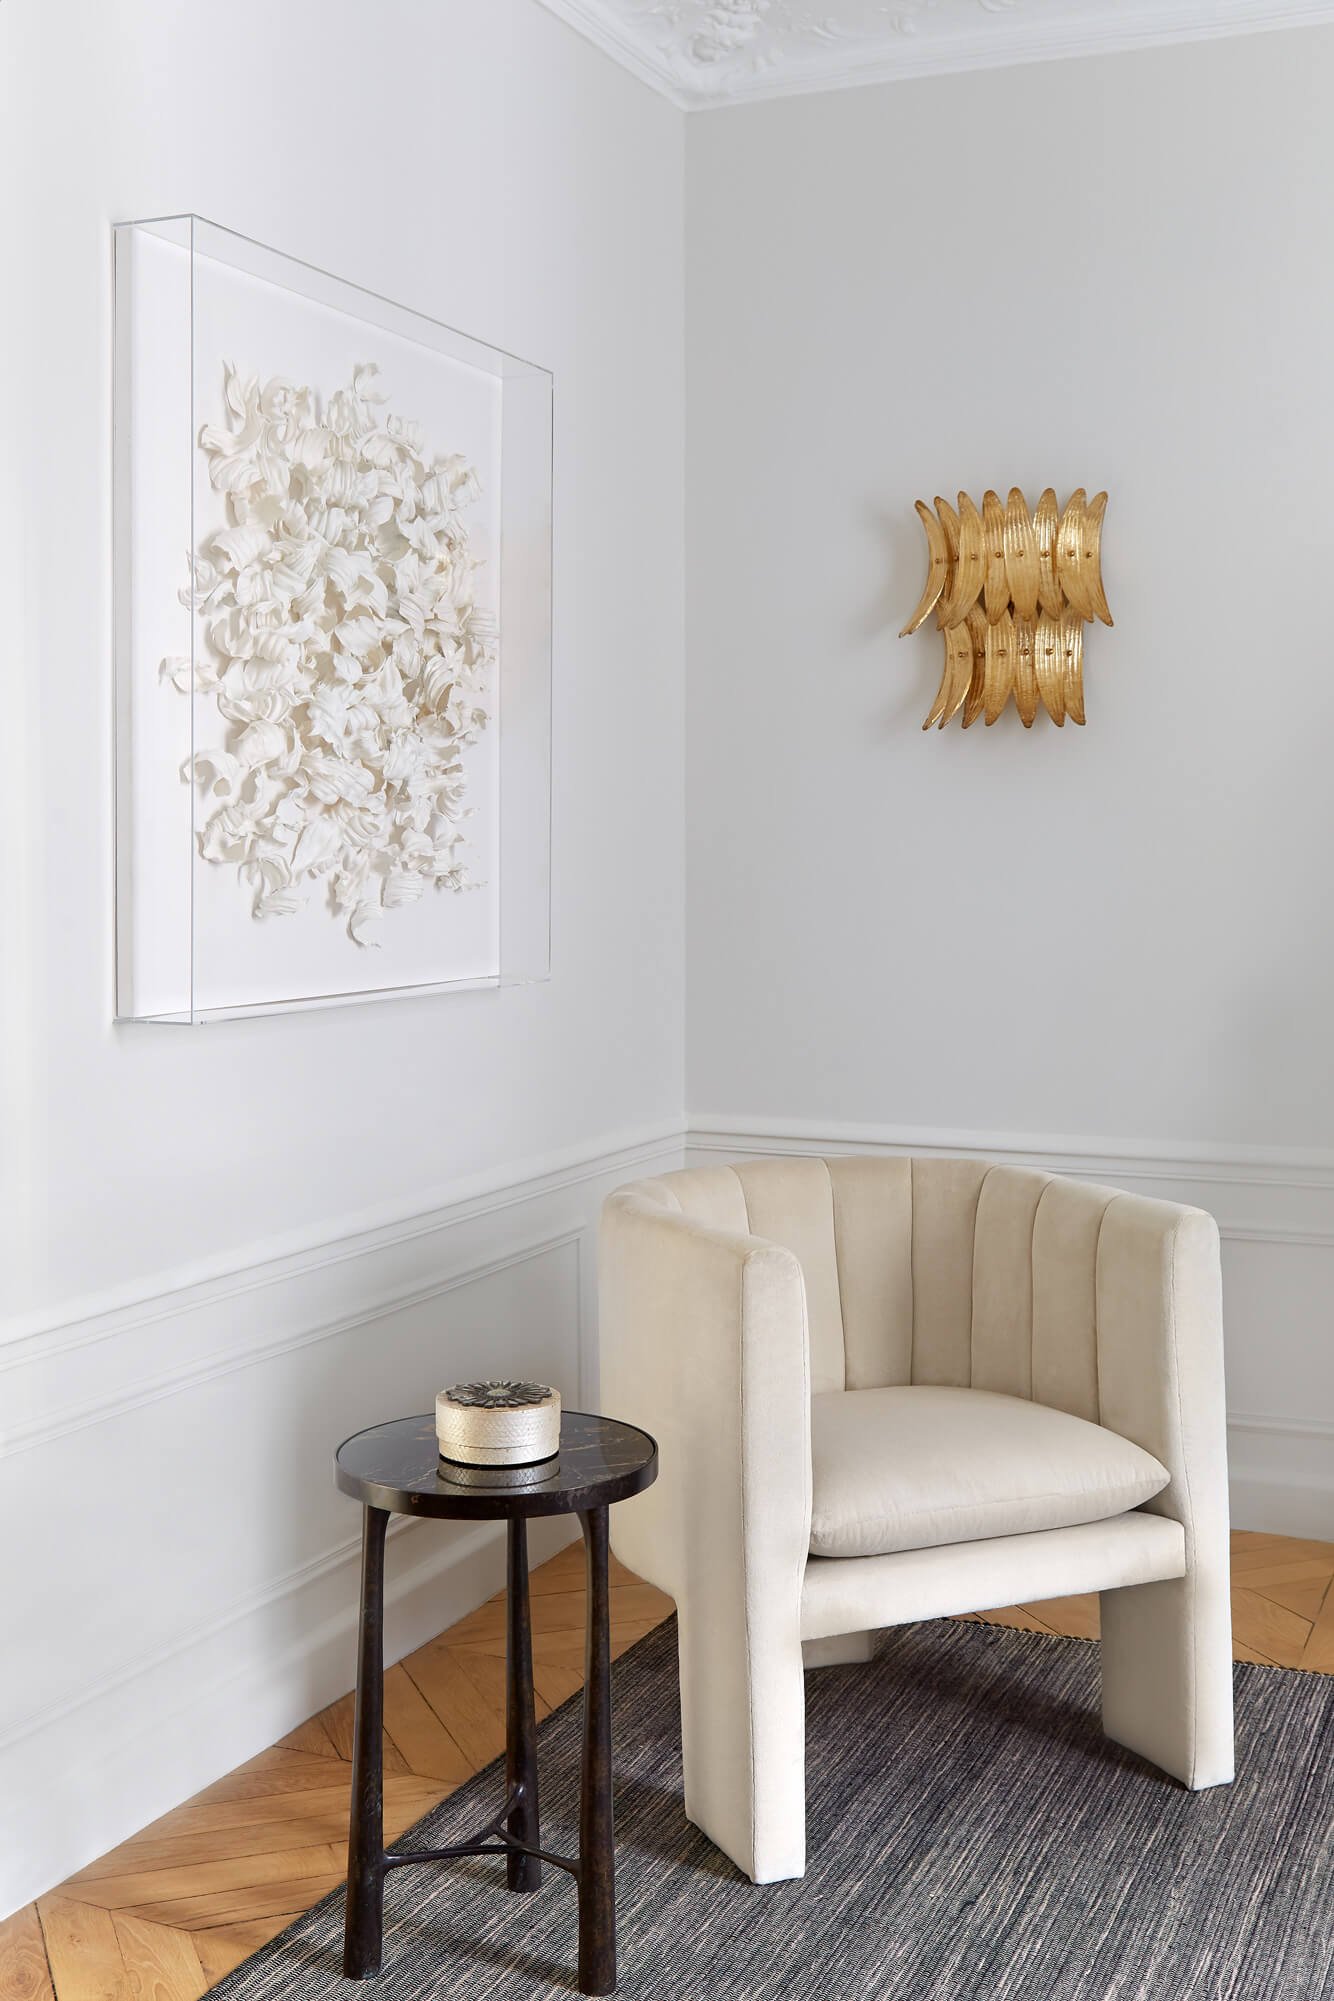  This white velvet chair makes this corner effortlessly sophisticated and modern. The walls feature a chic artwork and golden ornament. 